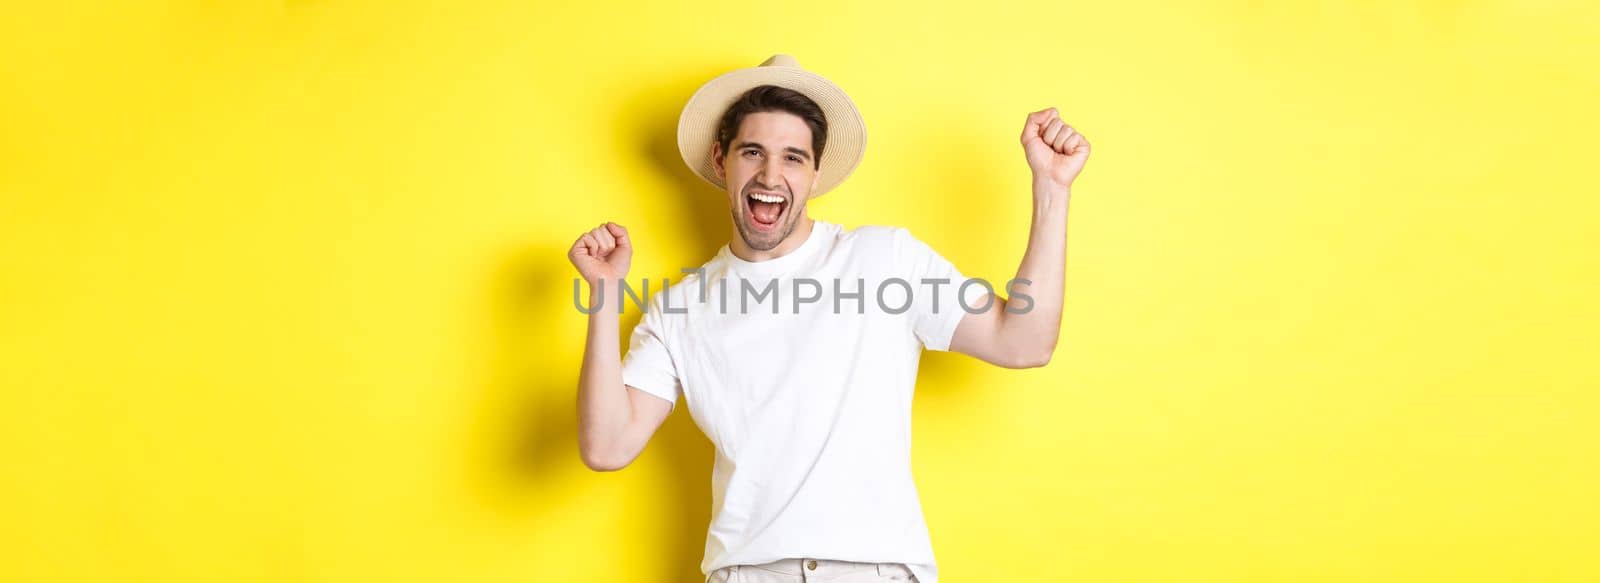 Concept of tourism and lifestyle. Happy man tourist celebrating, rejoicing over vacation, standing over yellow background.